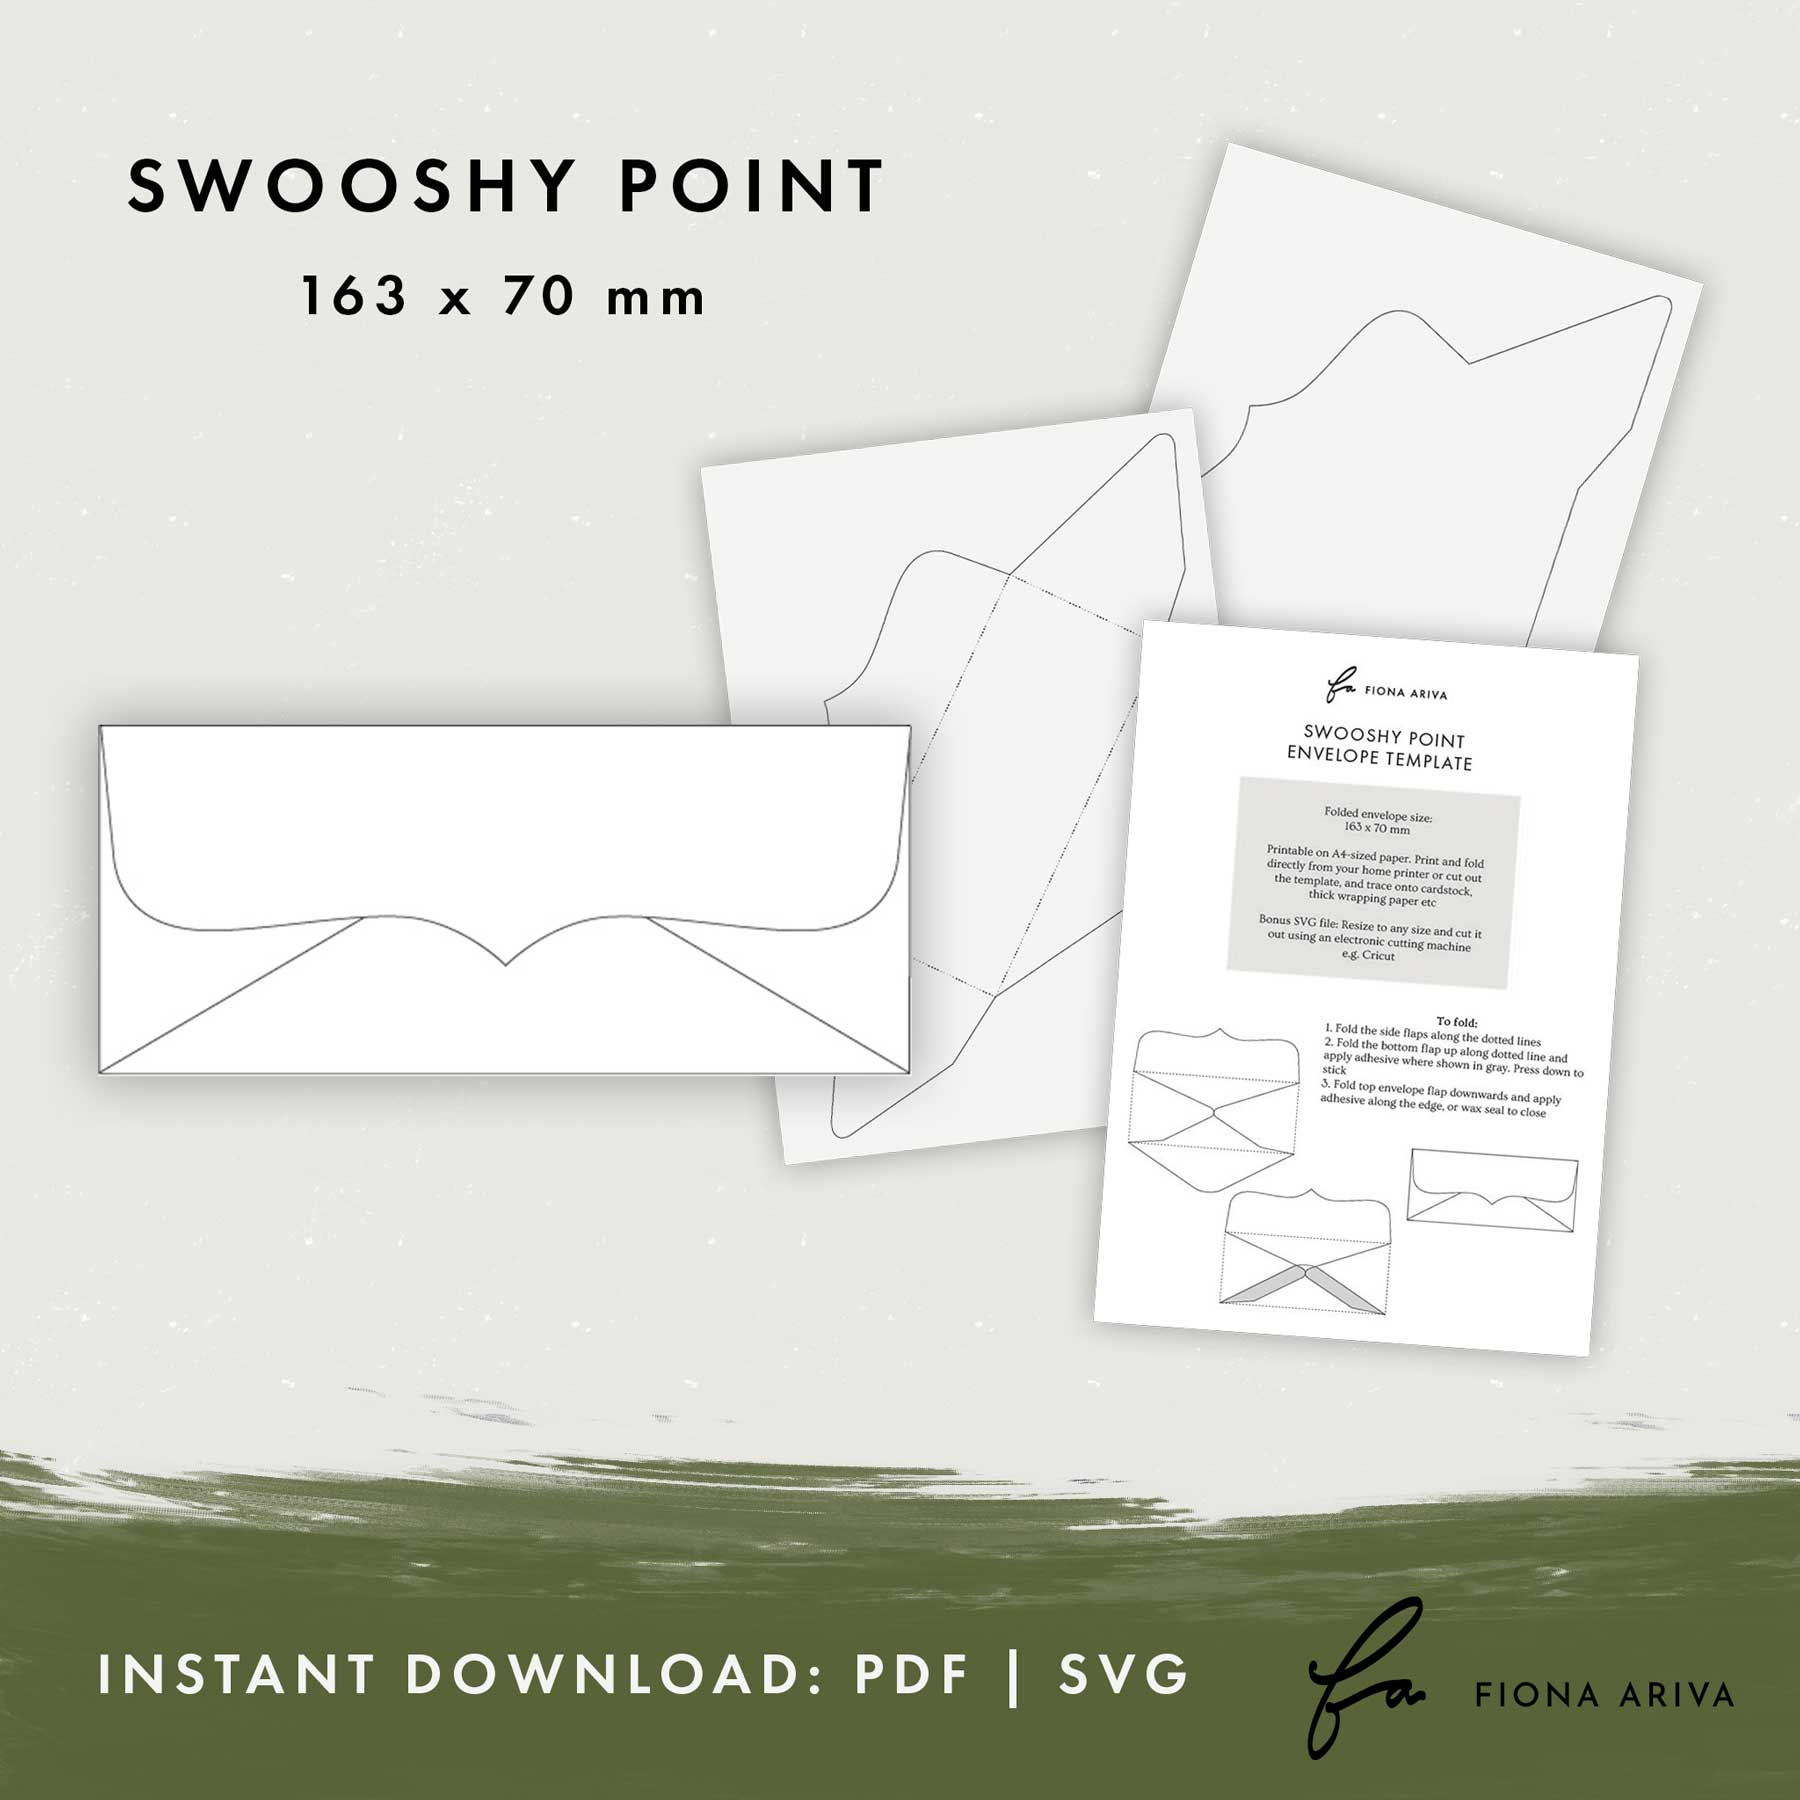 Swooshy Point Downloadable Envelope Template 163 x 70mm